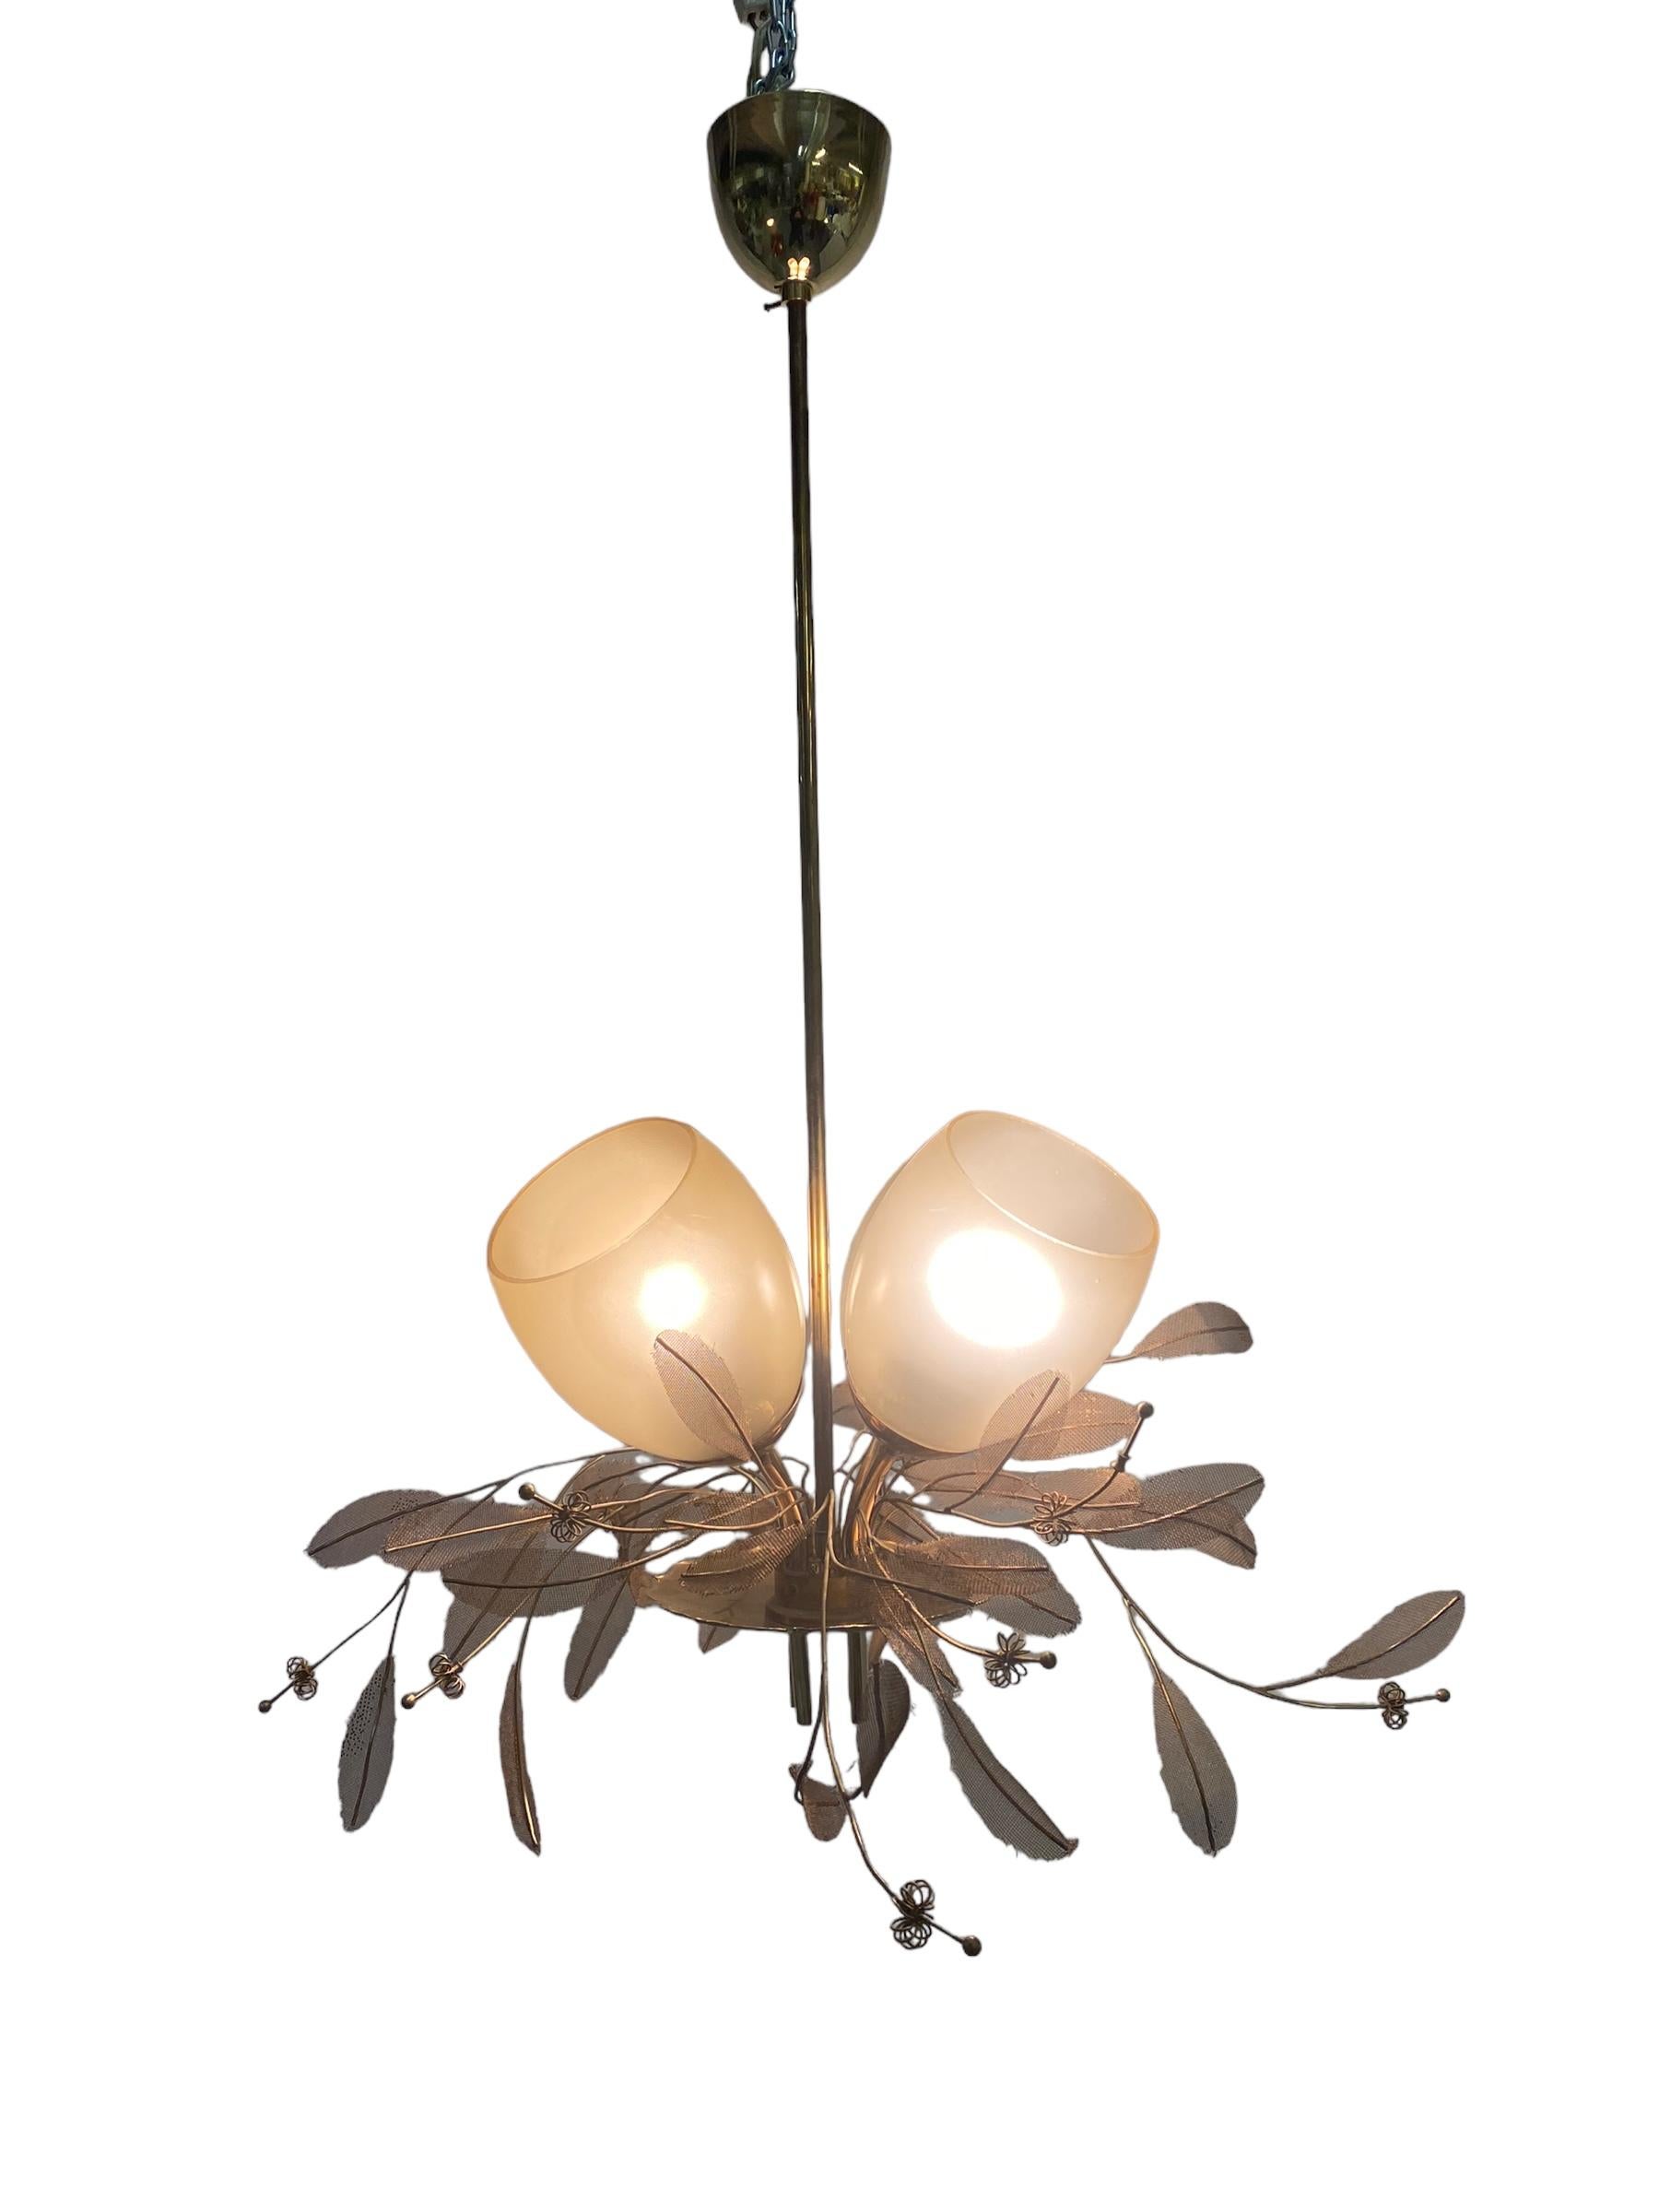 Paavo Tynell Chandelier model 9029/4, Taito Oy 1950s In Good Condition For Sale In Helsinki, FI